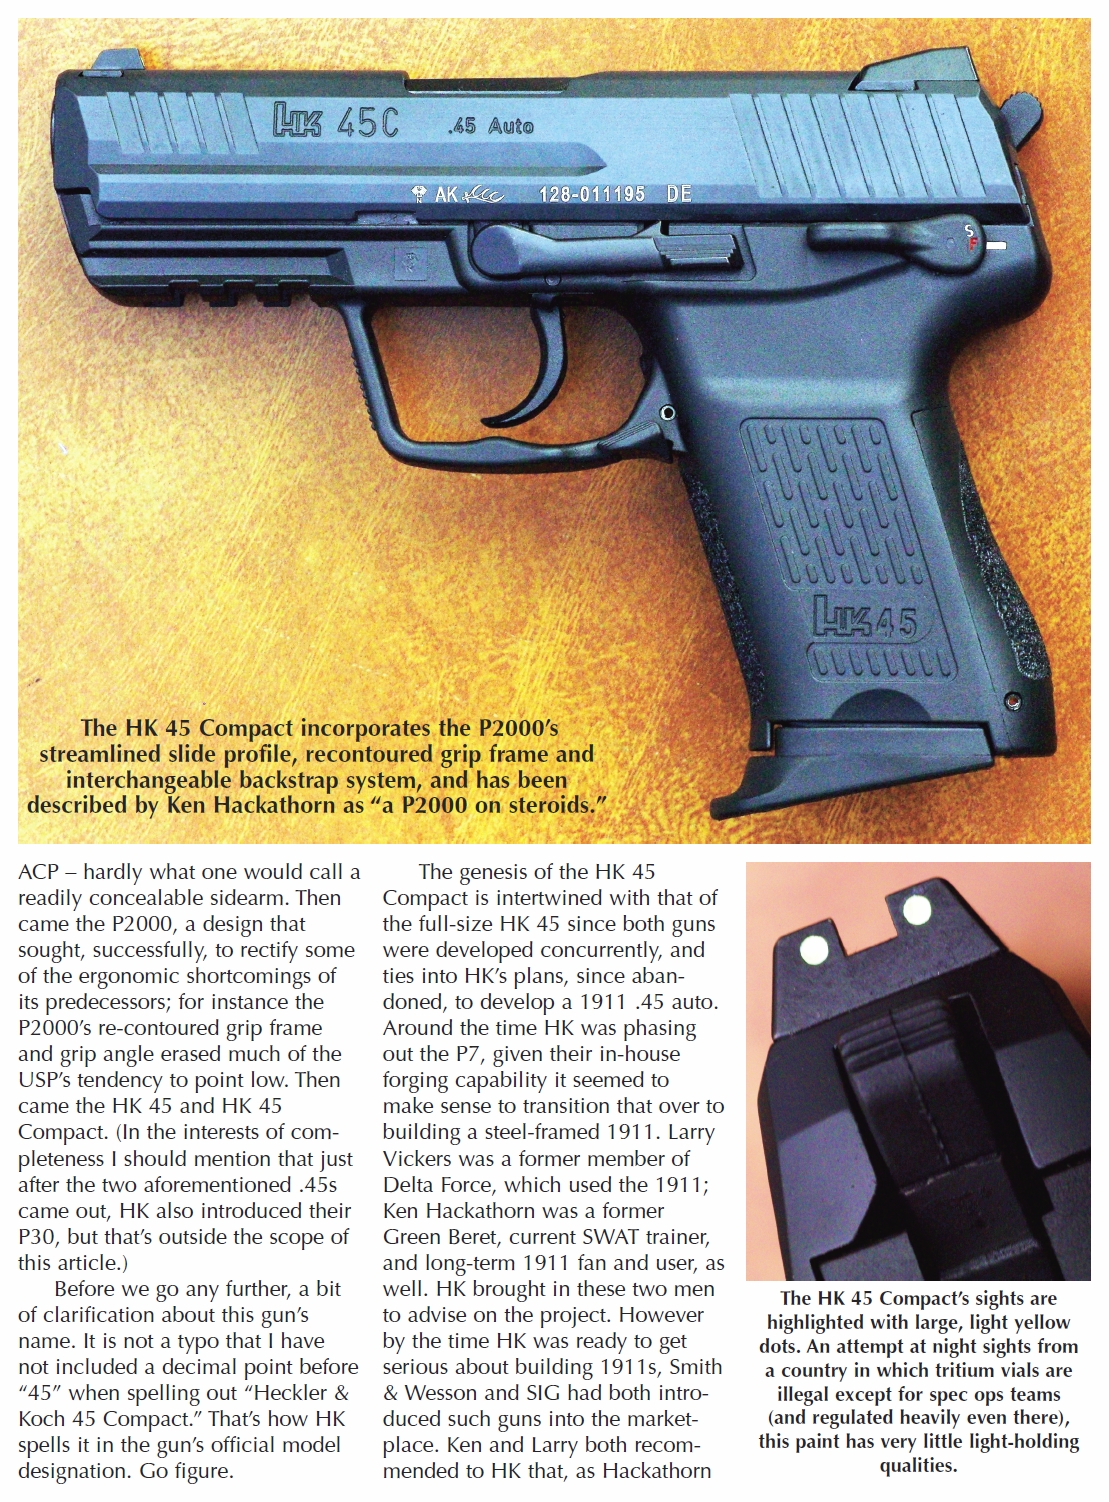 Heckler and Koch's 45 Compact page 2